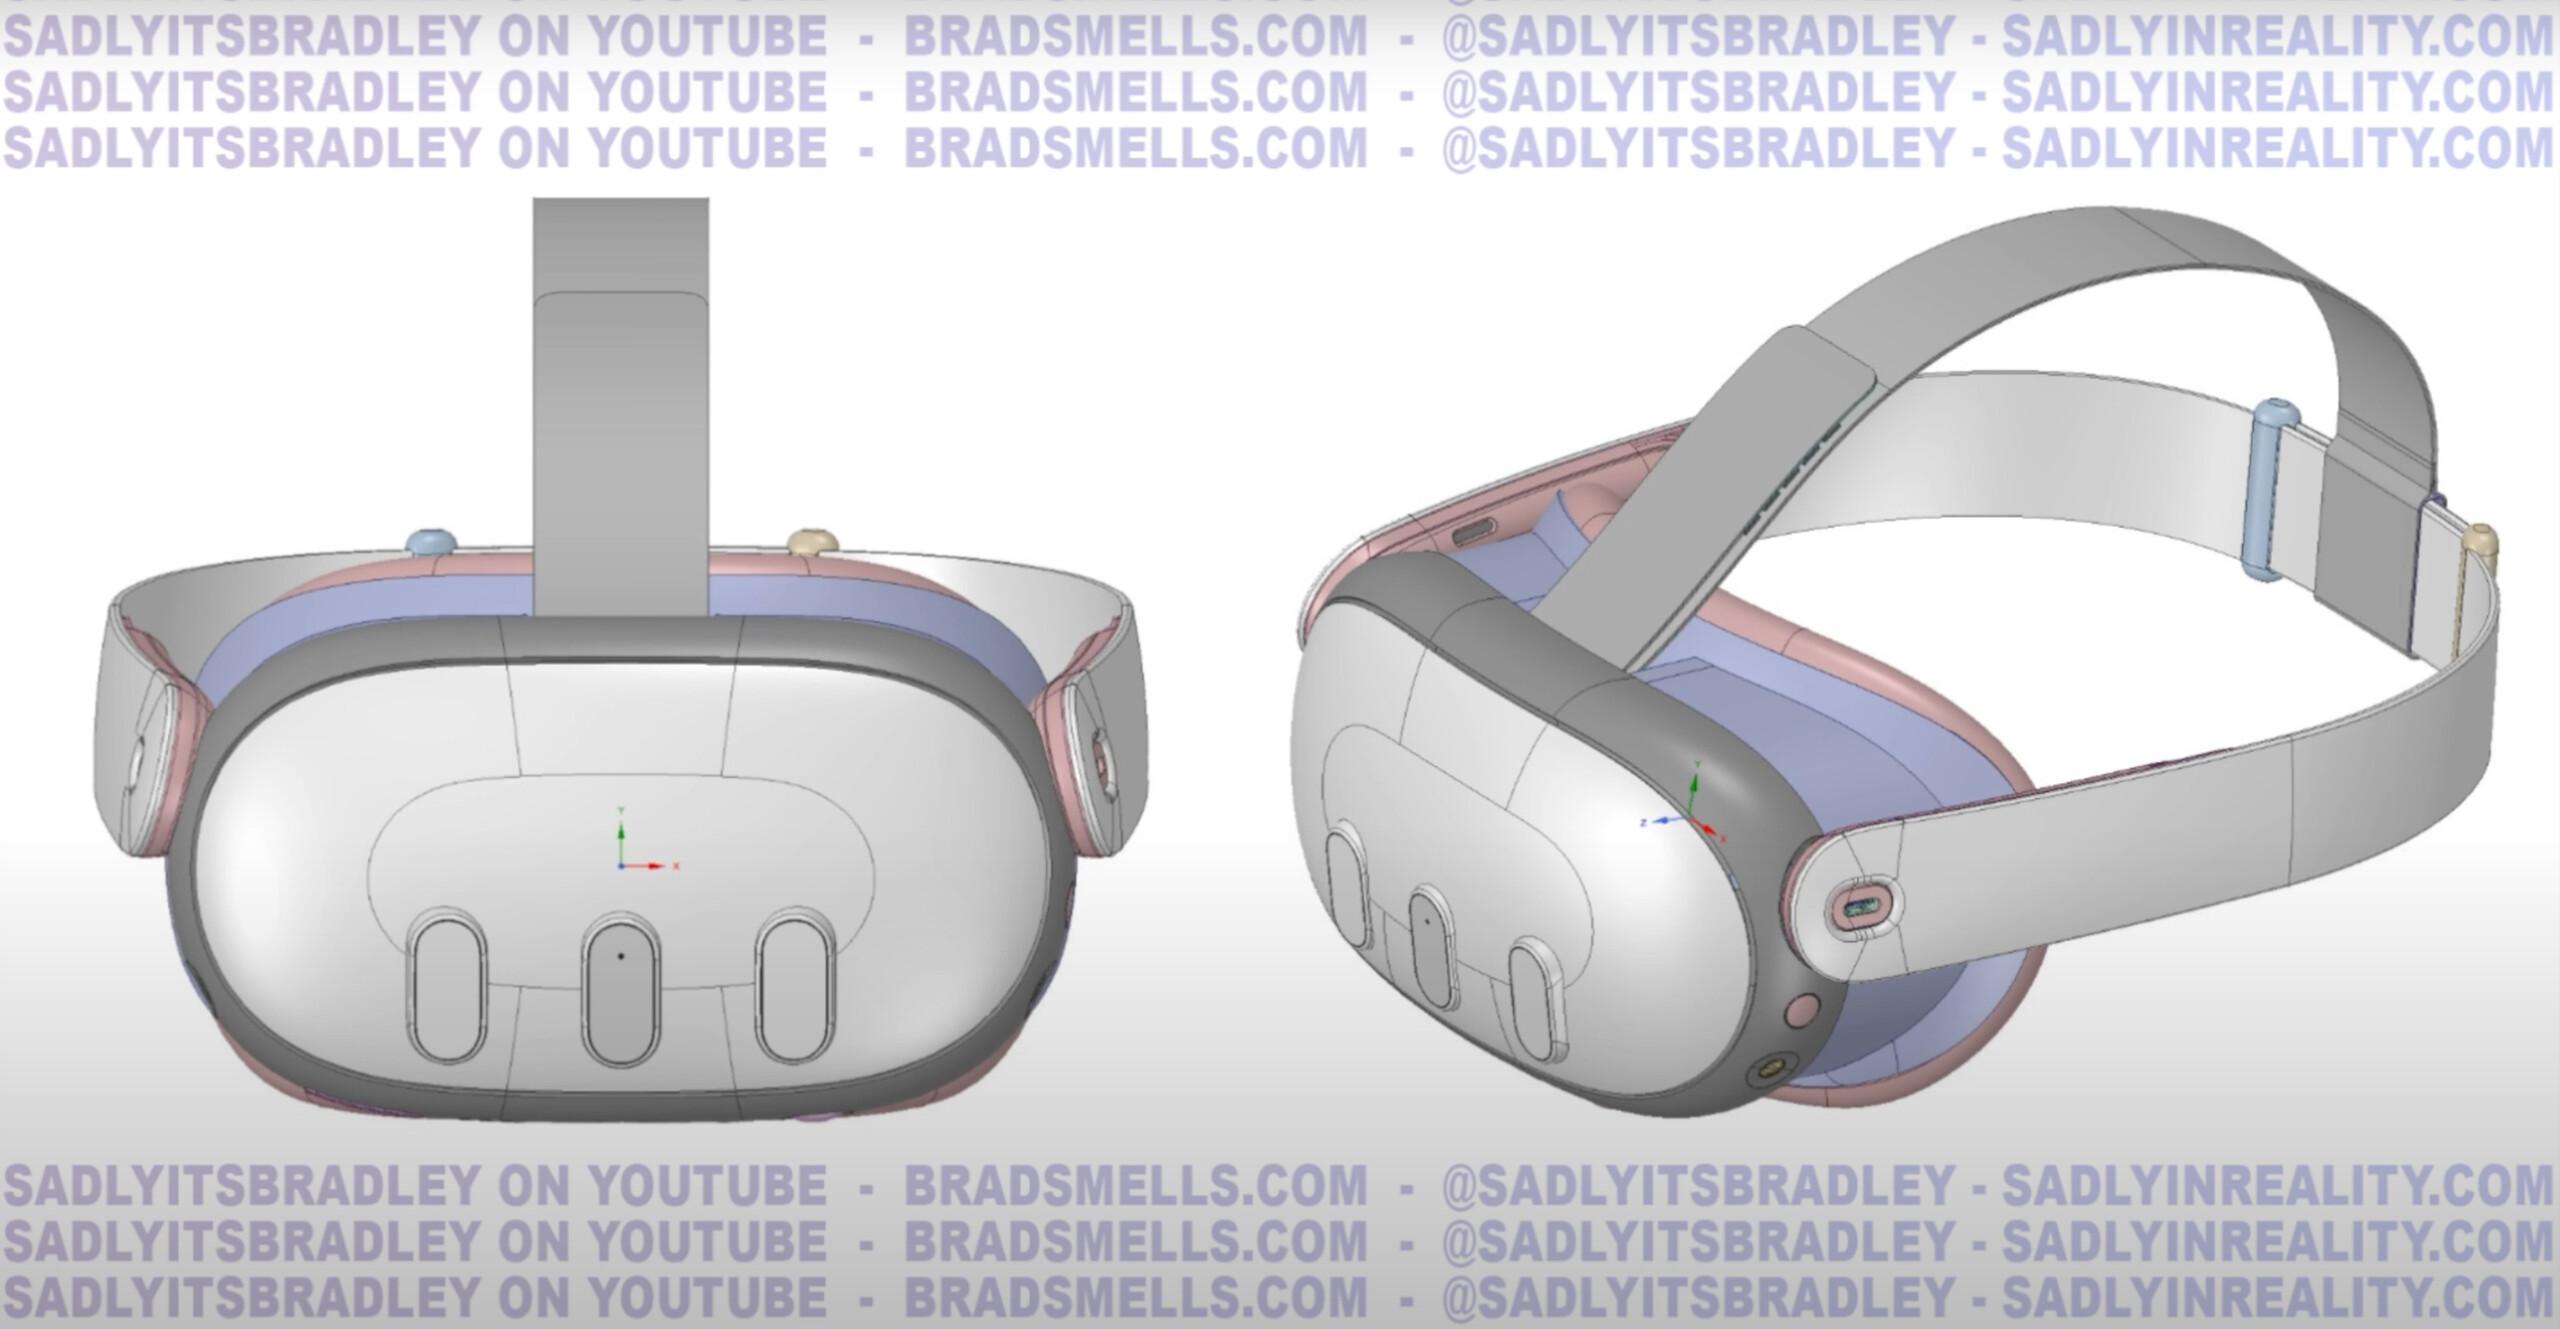 Meta Quest pro announced: How to pre-order the new VR headset in